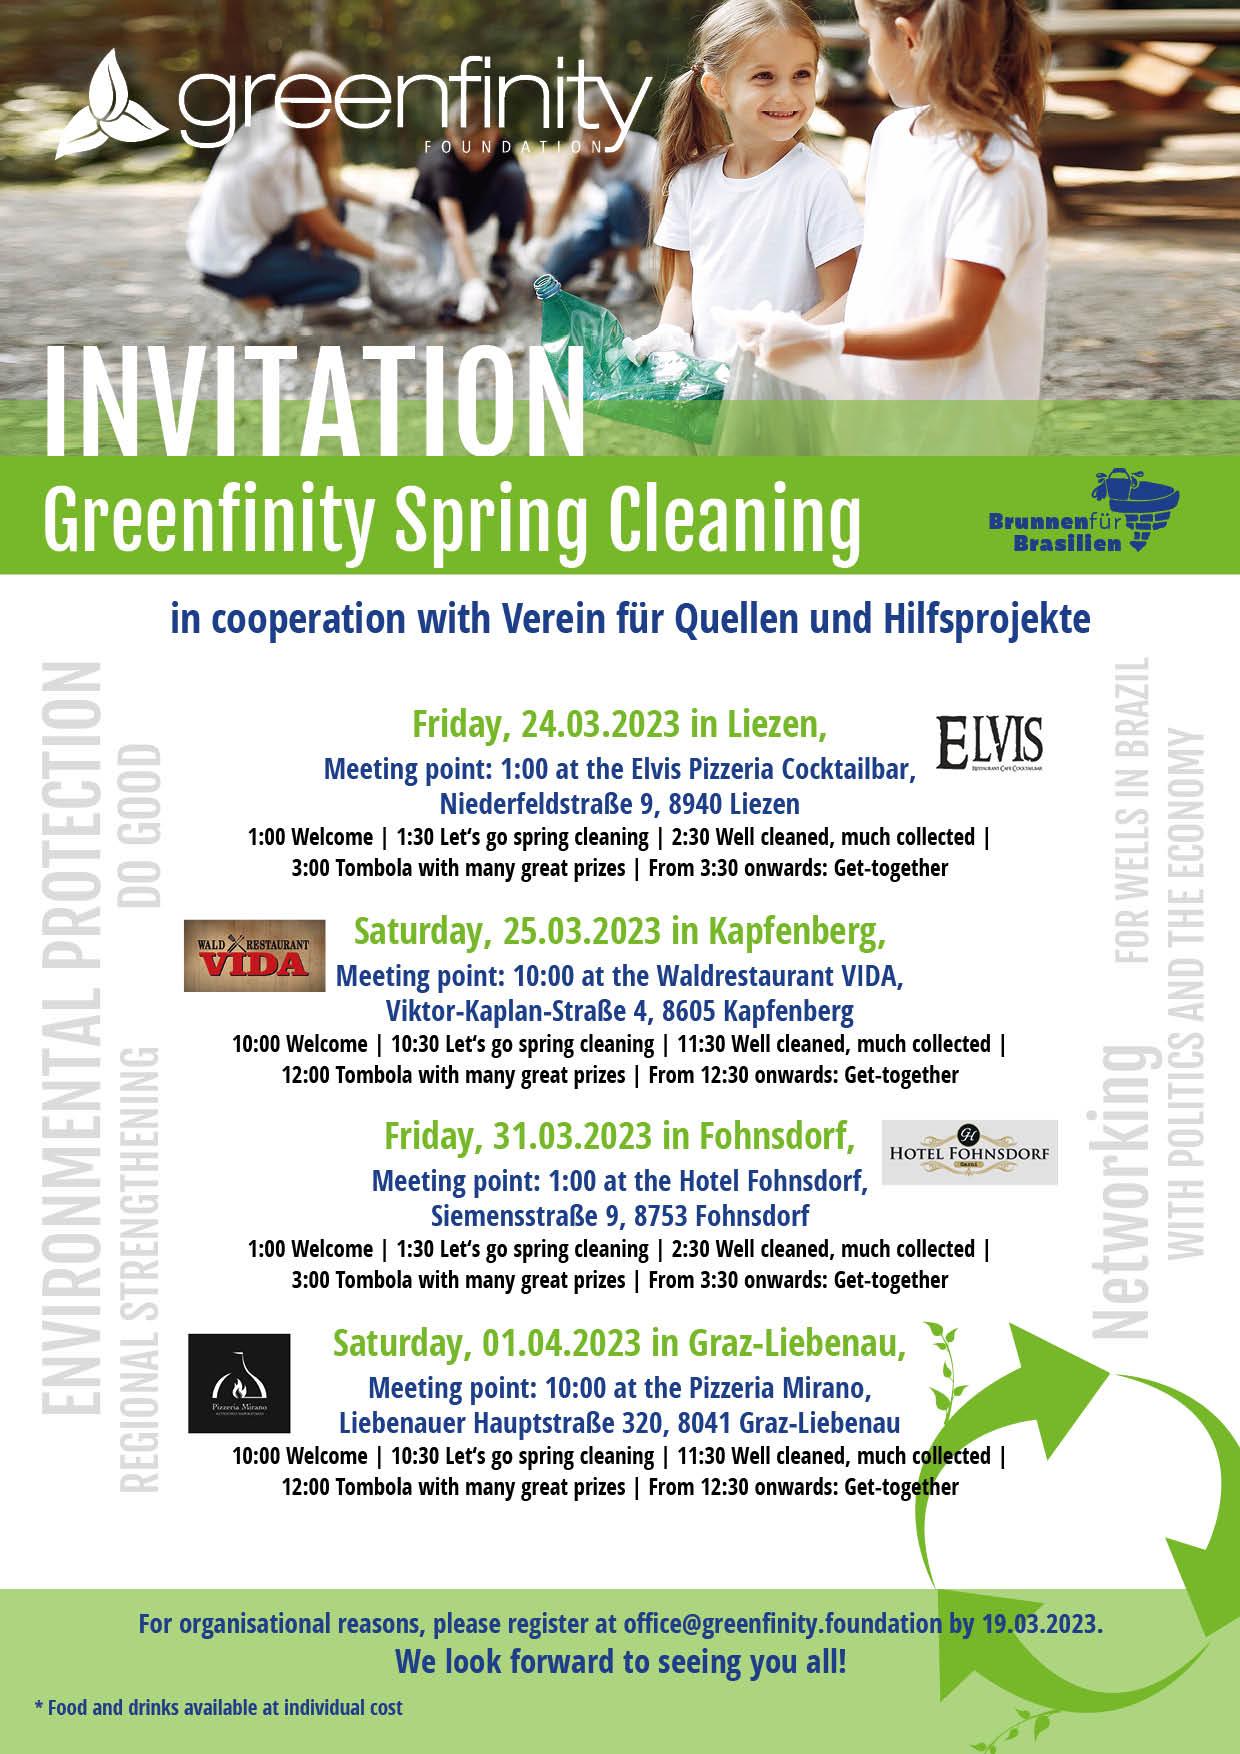 Greenfinity Spring Cleaning